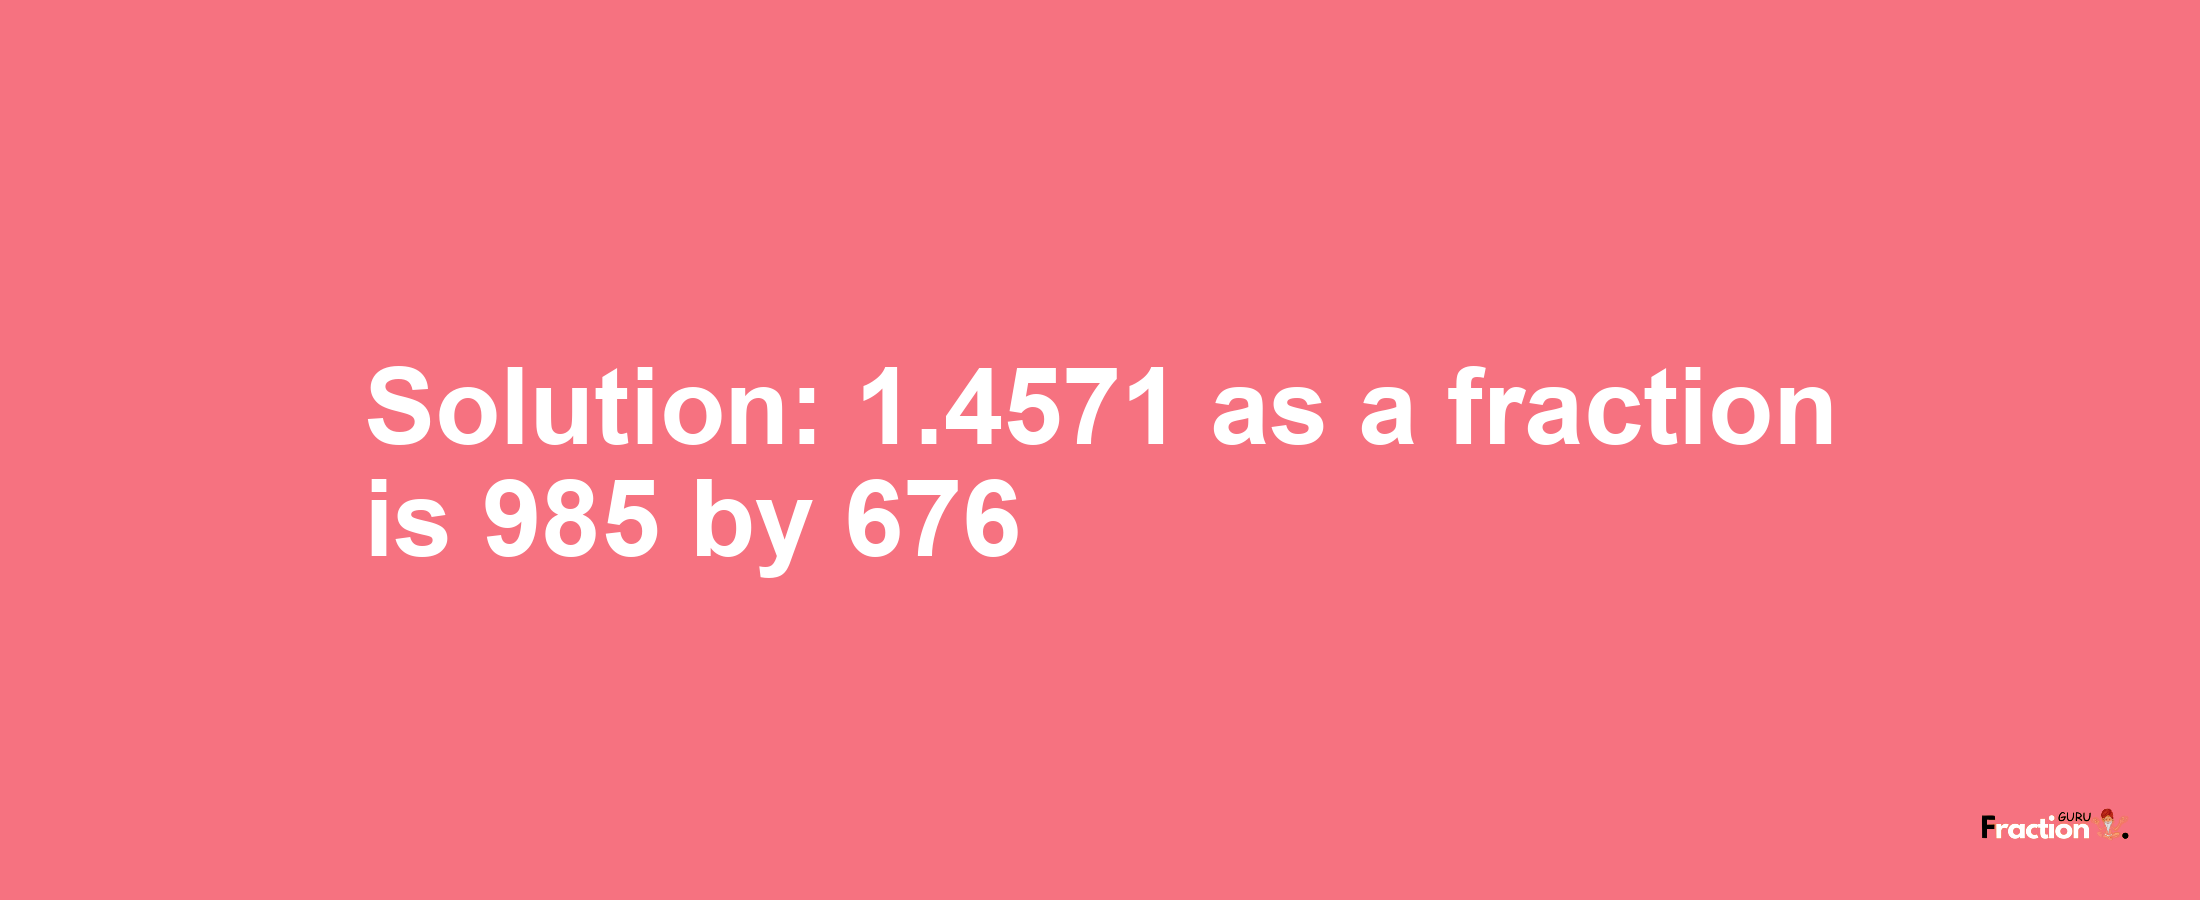 Solution:1.4571 as a fraction is 985/676